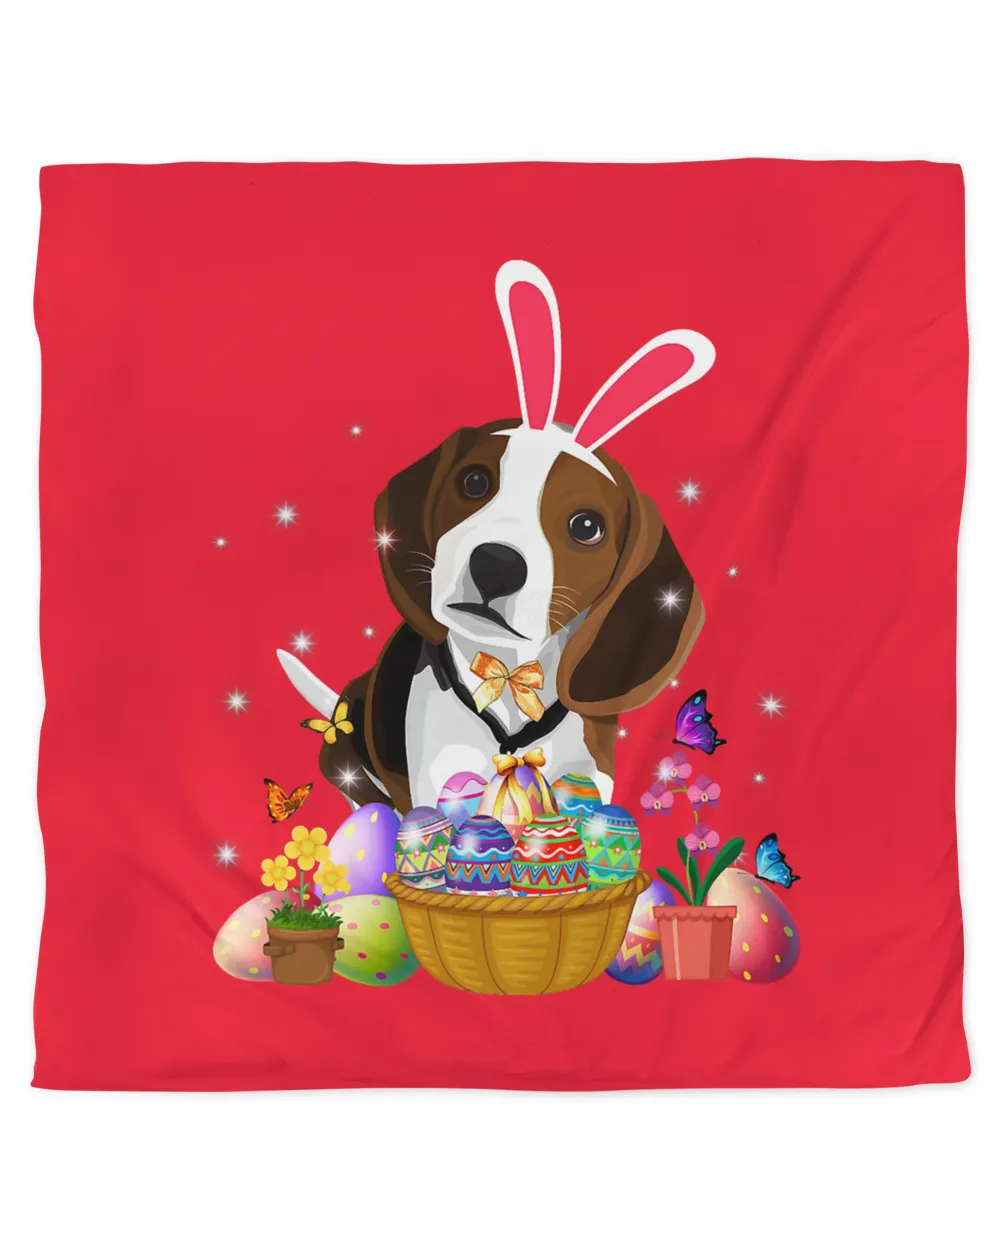 Cute Bunny Beagle Dog & Easter Eggs Basket Happy Easter Day T-Shirt